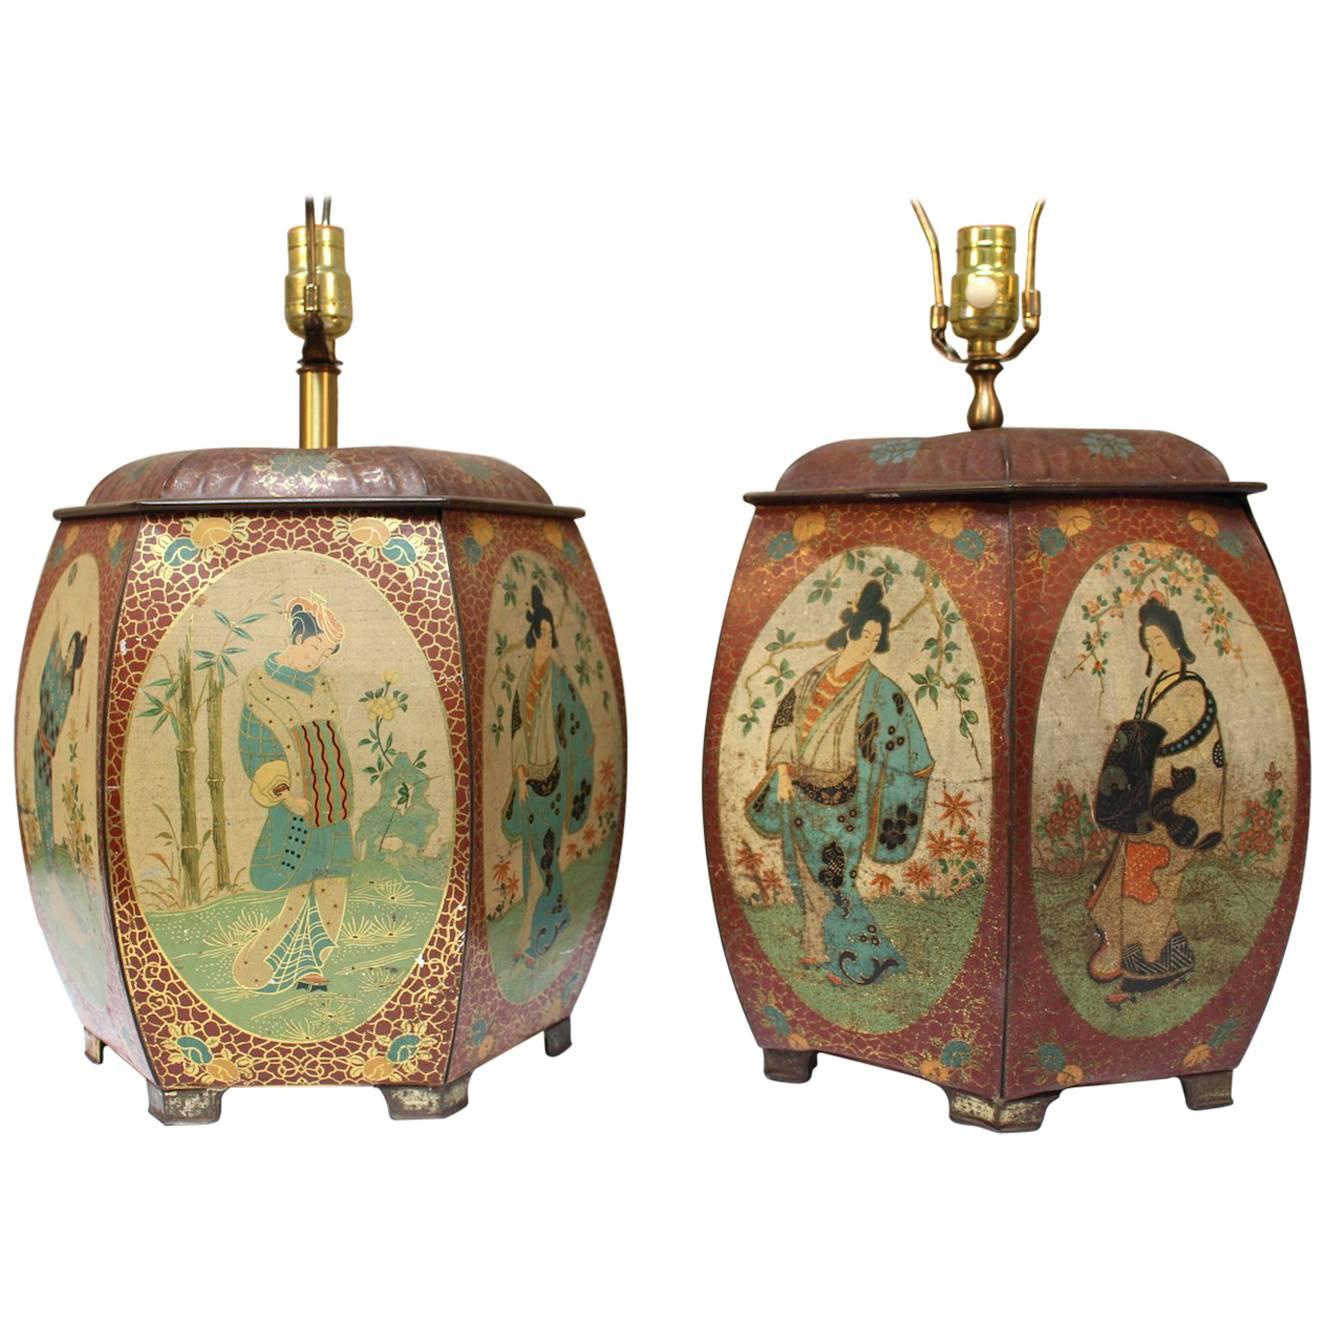 Pair of Chinese Painted Tin Tea Containers, Mounted as Lamps